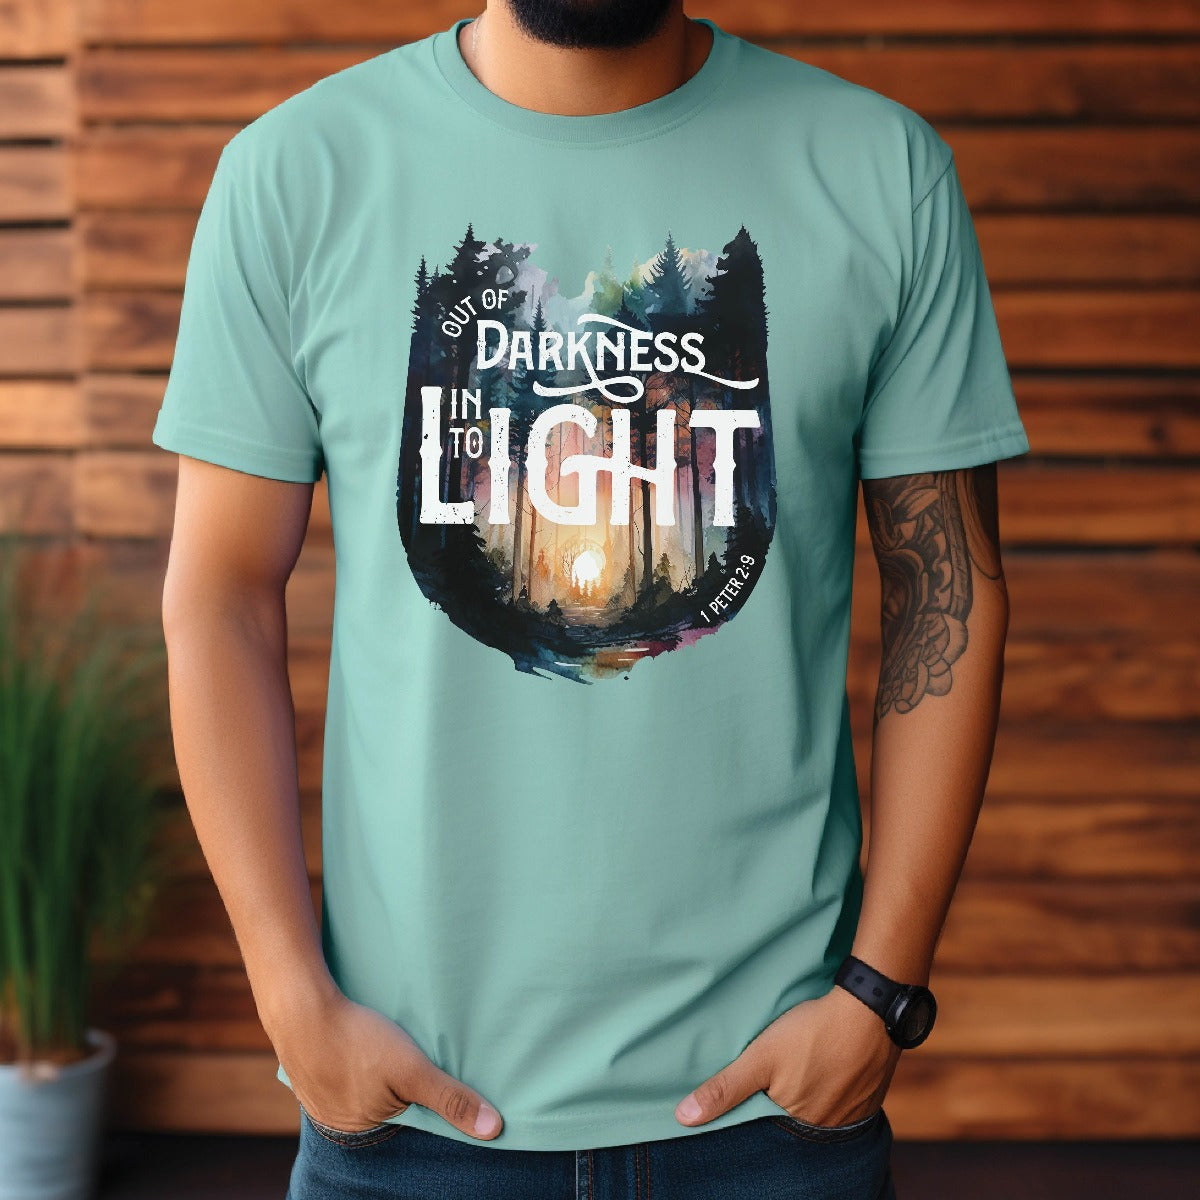 Bearded trendy man wearing Seafoam bright teal color garment dyed Comfort Colors C1717 unisex faith-based Christian t-shirt with "Out of Darkness, Into Light" 1 Peter 2:9 bible verse and watercolor moody forest trees outdoor scene, designed for men and women